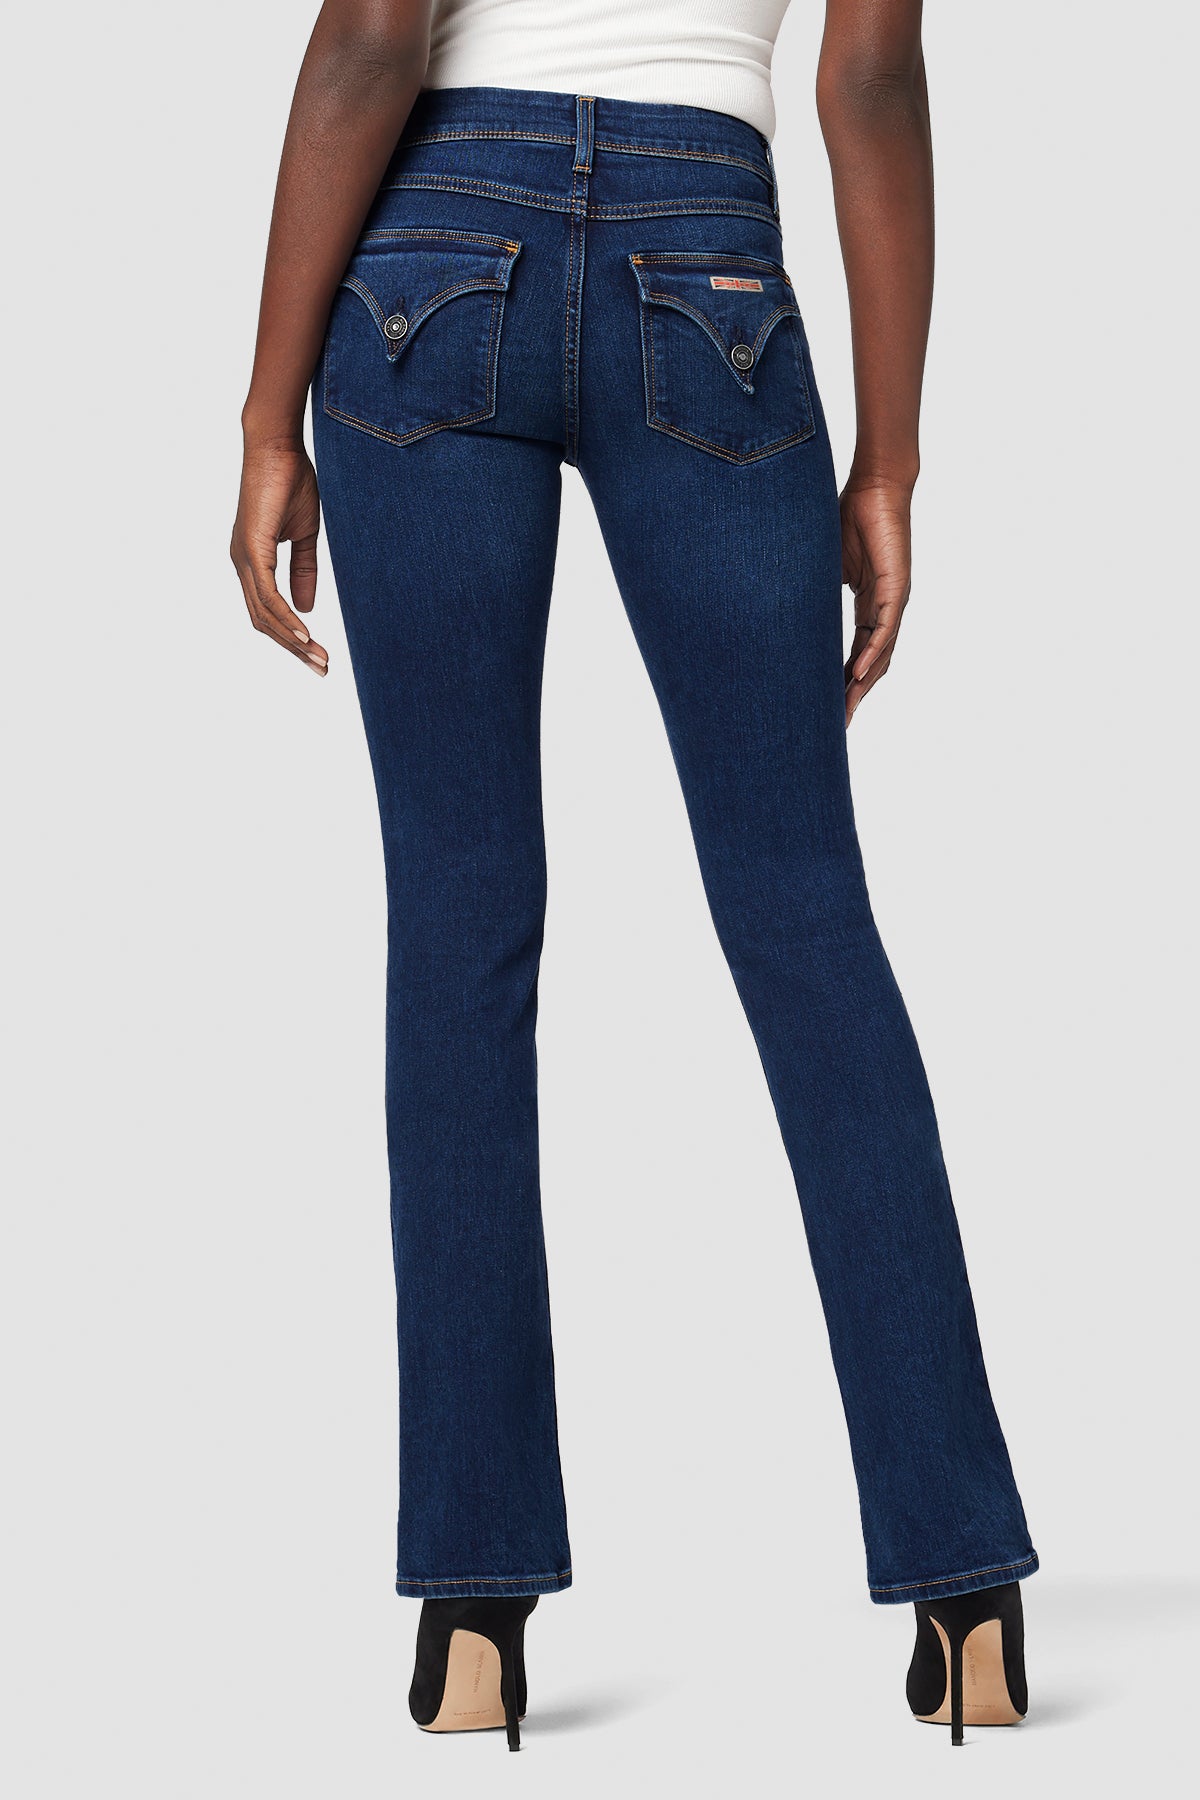 Women's Bootcut Jean from Crew Clothing Company